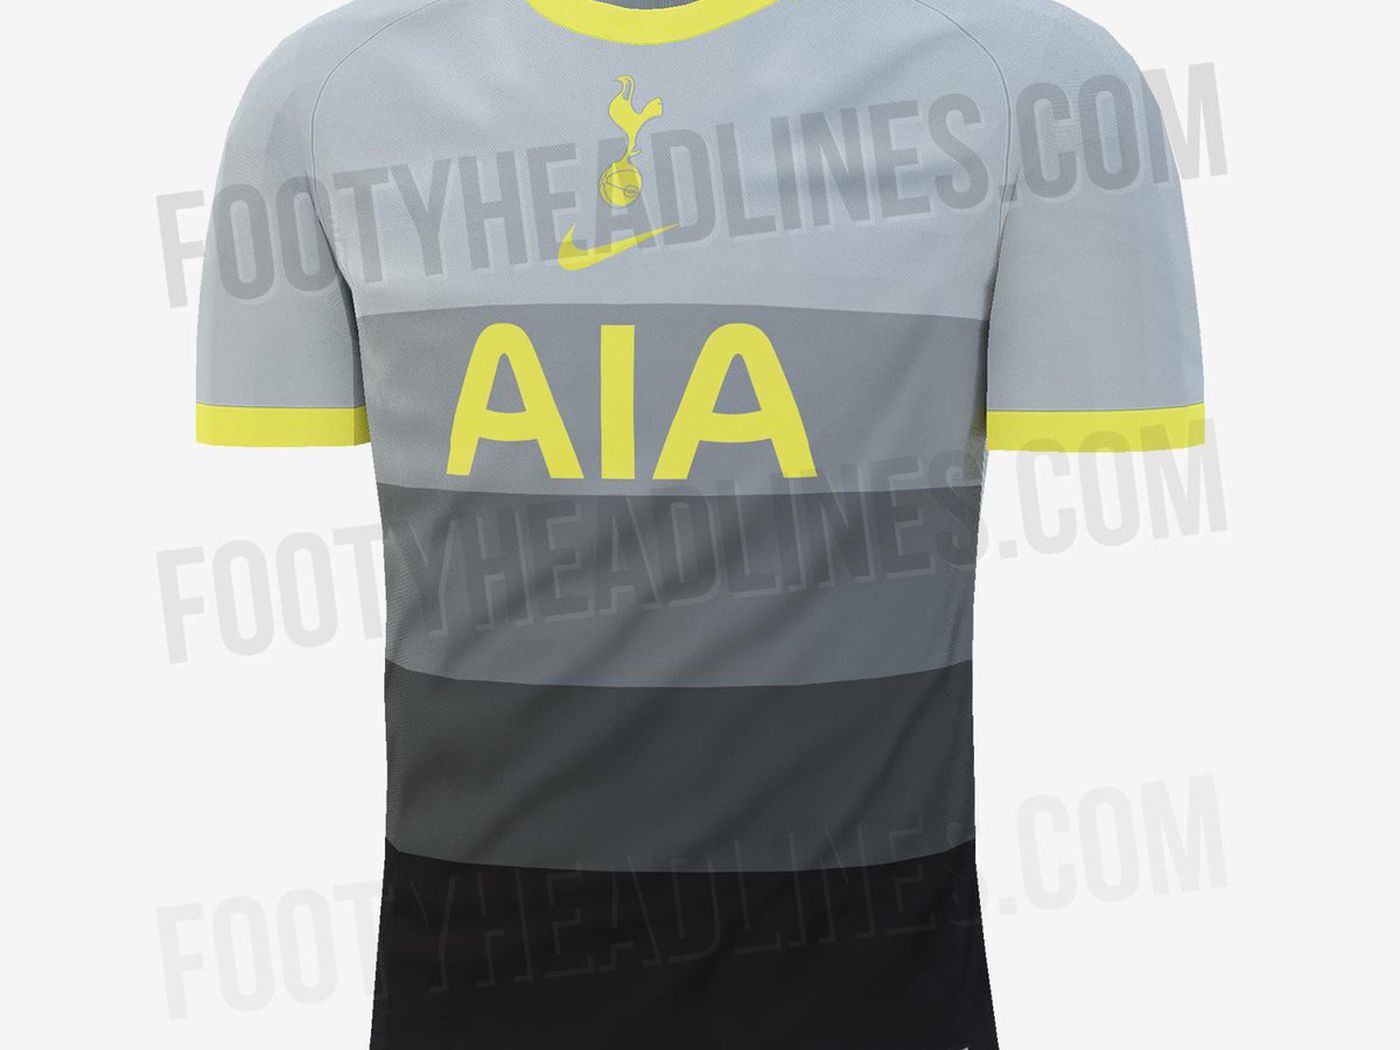 Tottenham Apparently Have A Fourth Kit In 2020 21 And It Has Been Leaked Cartilage Free Captain